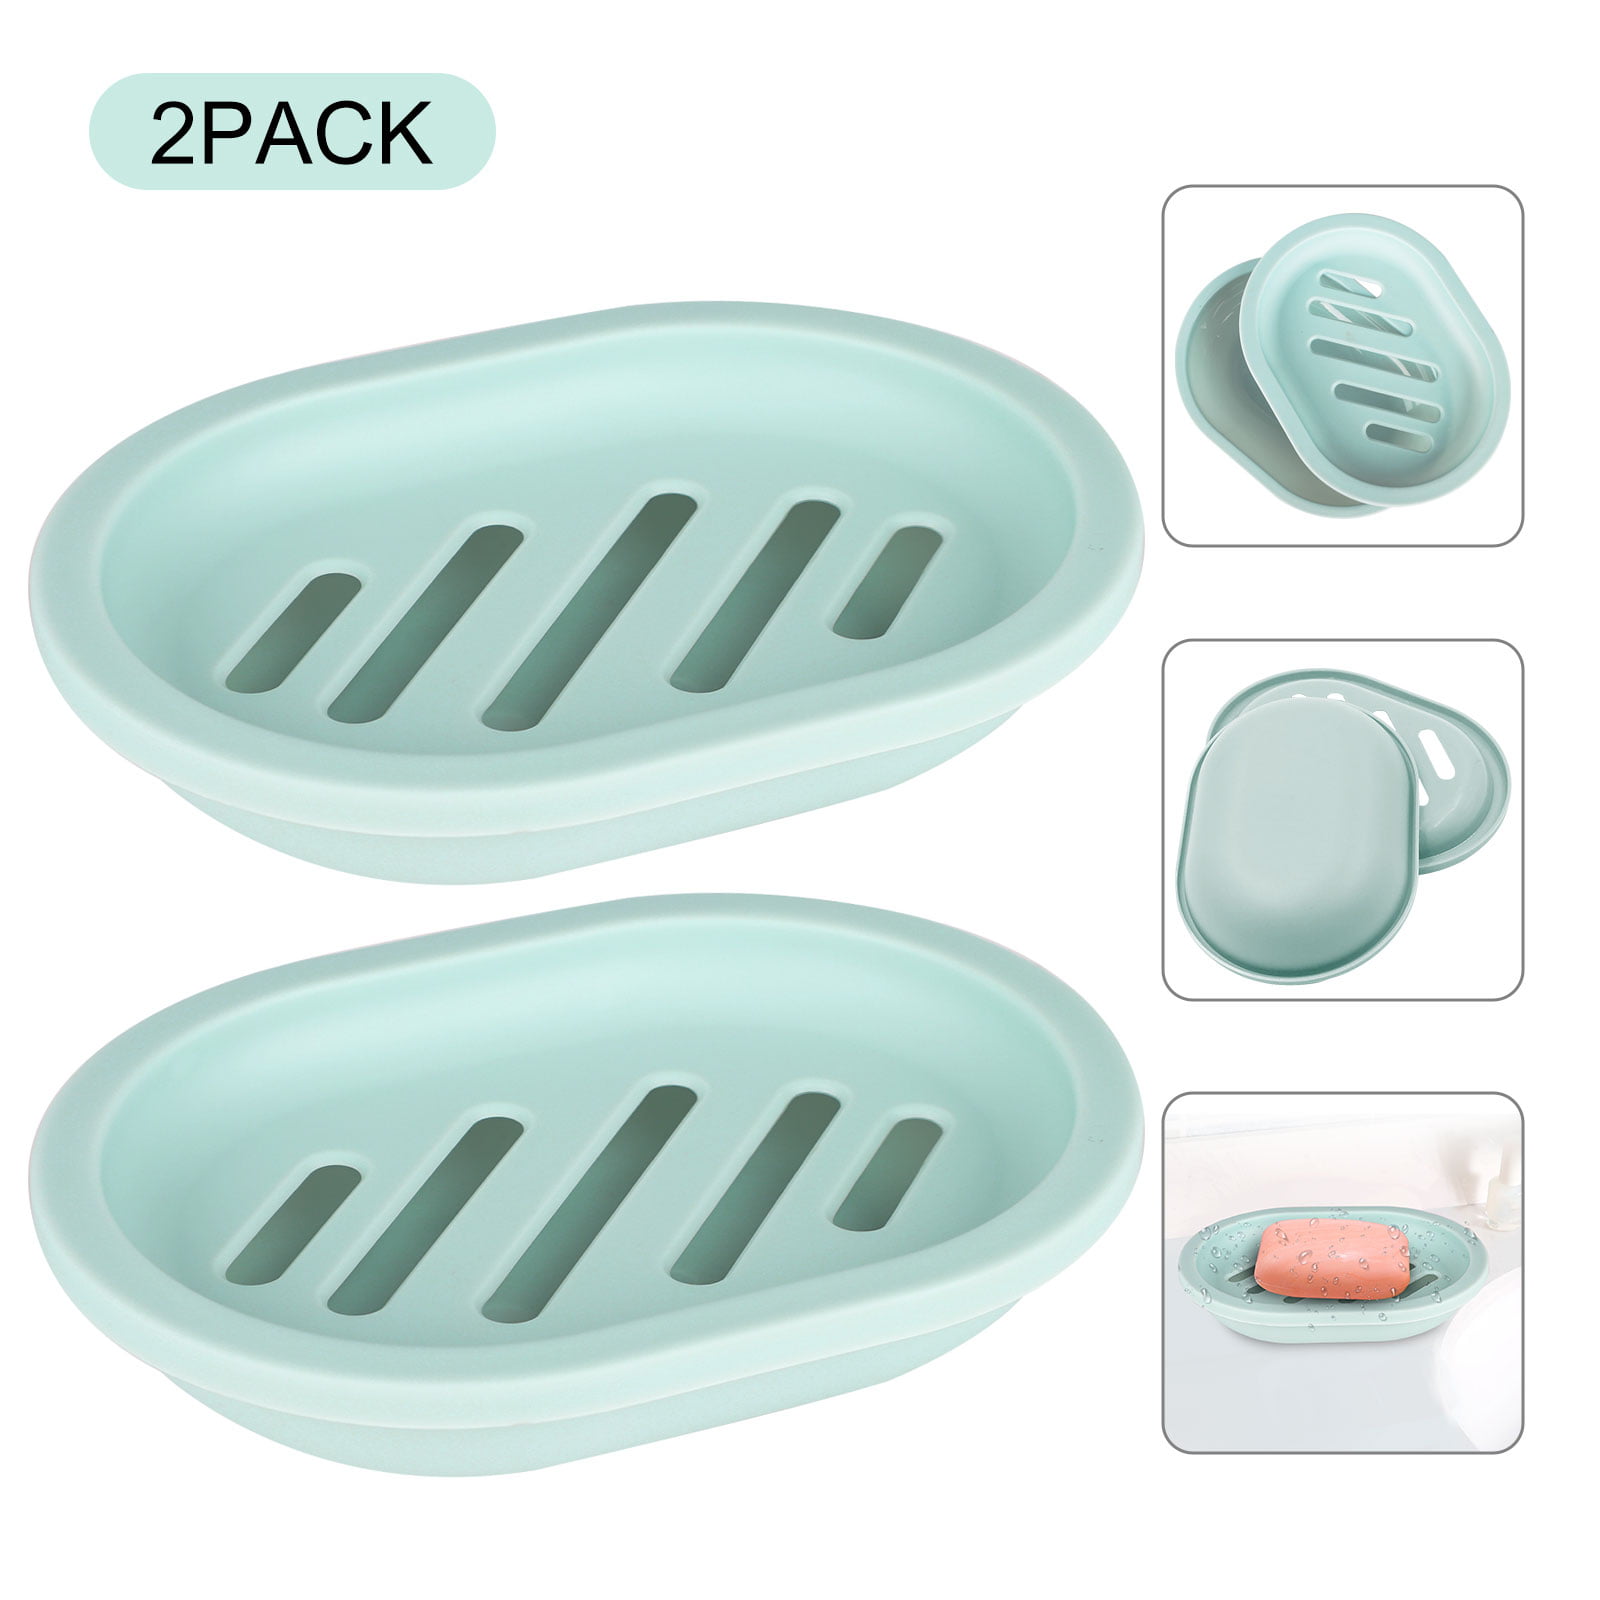 Small, Clear InterDesign Soap Savers DishHolder Oval Shaped Made of Plastic 